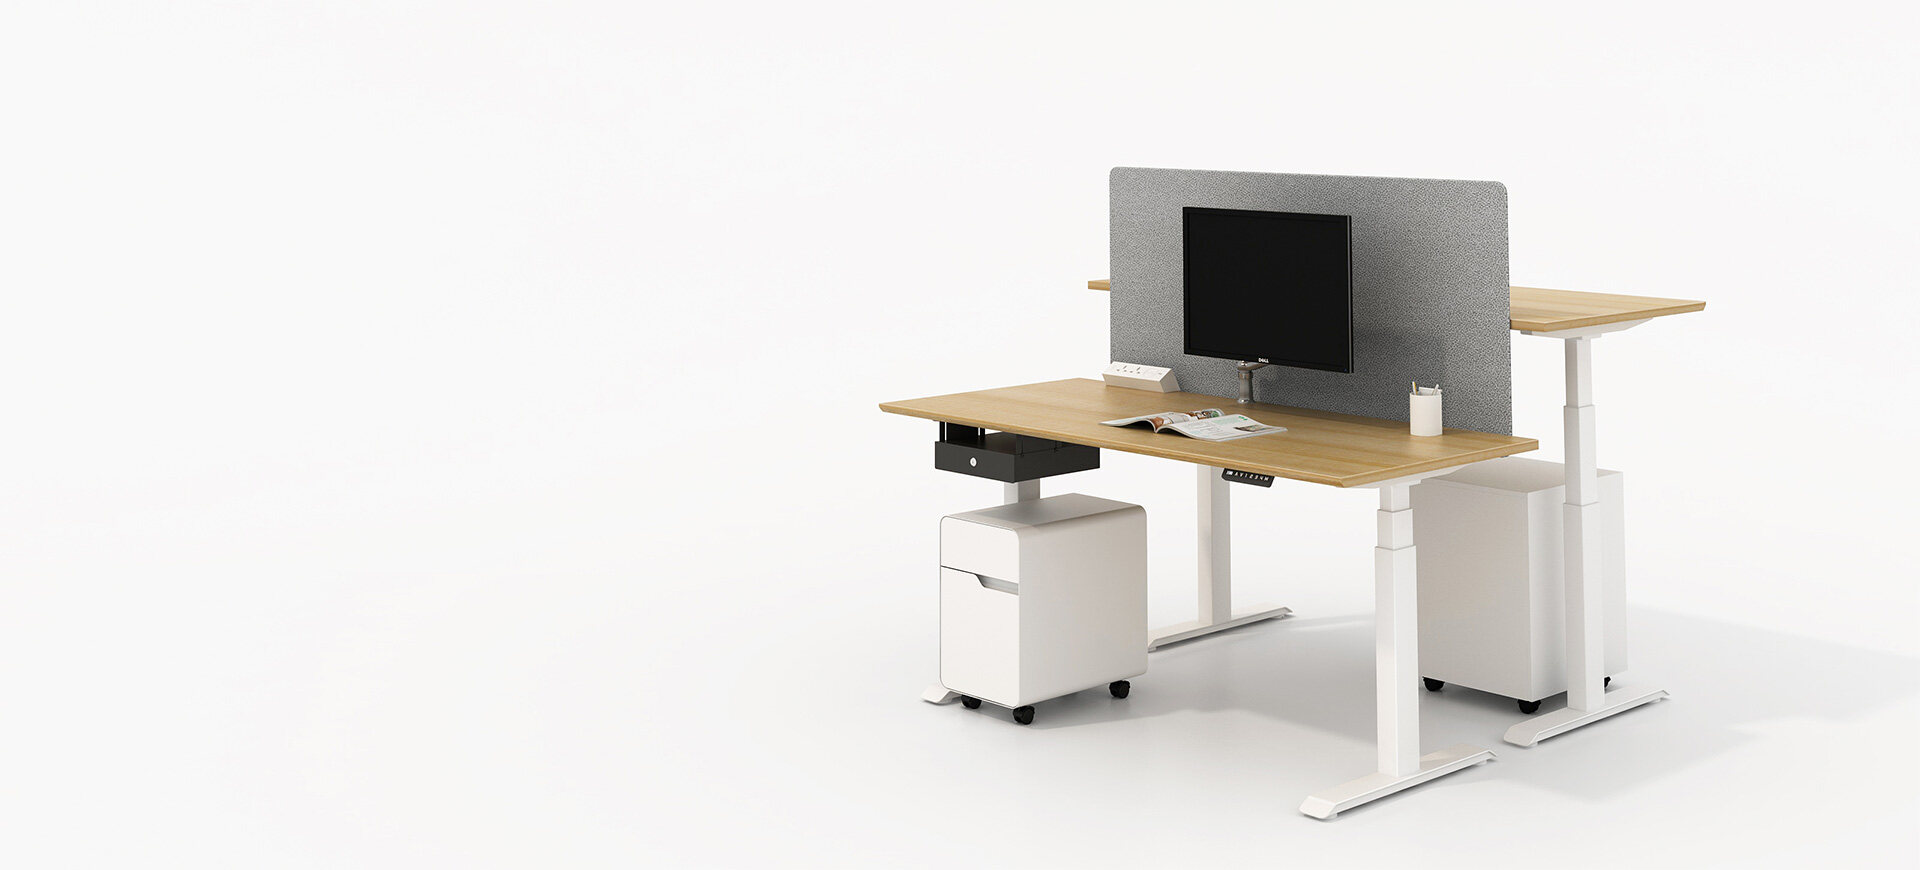 Height adjustable table,Electric stand table,sit stand desk